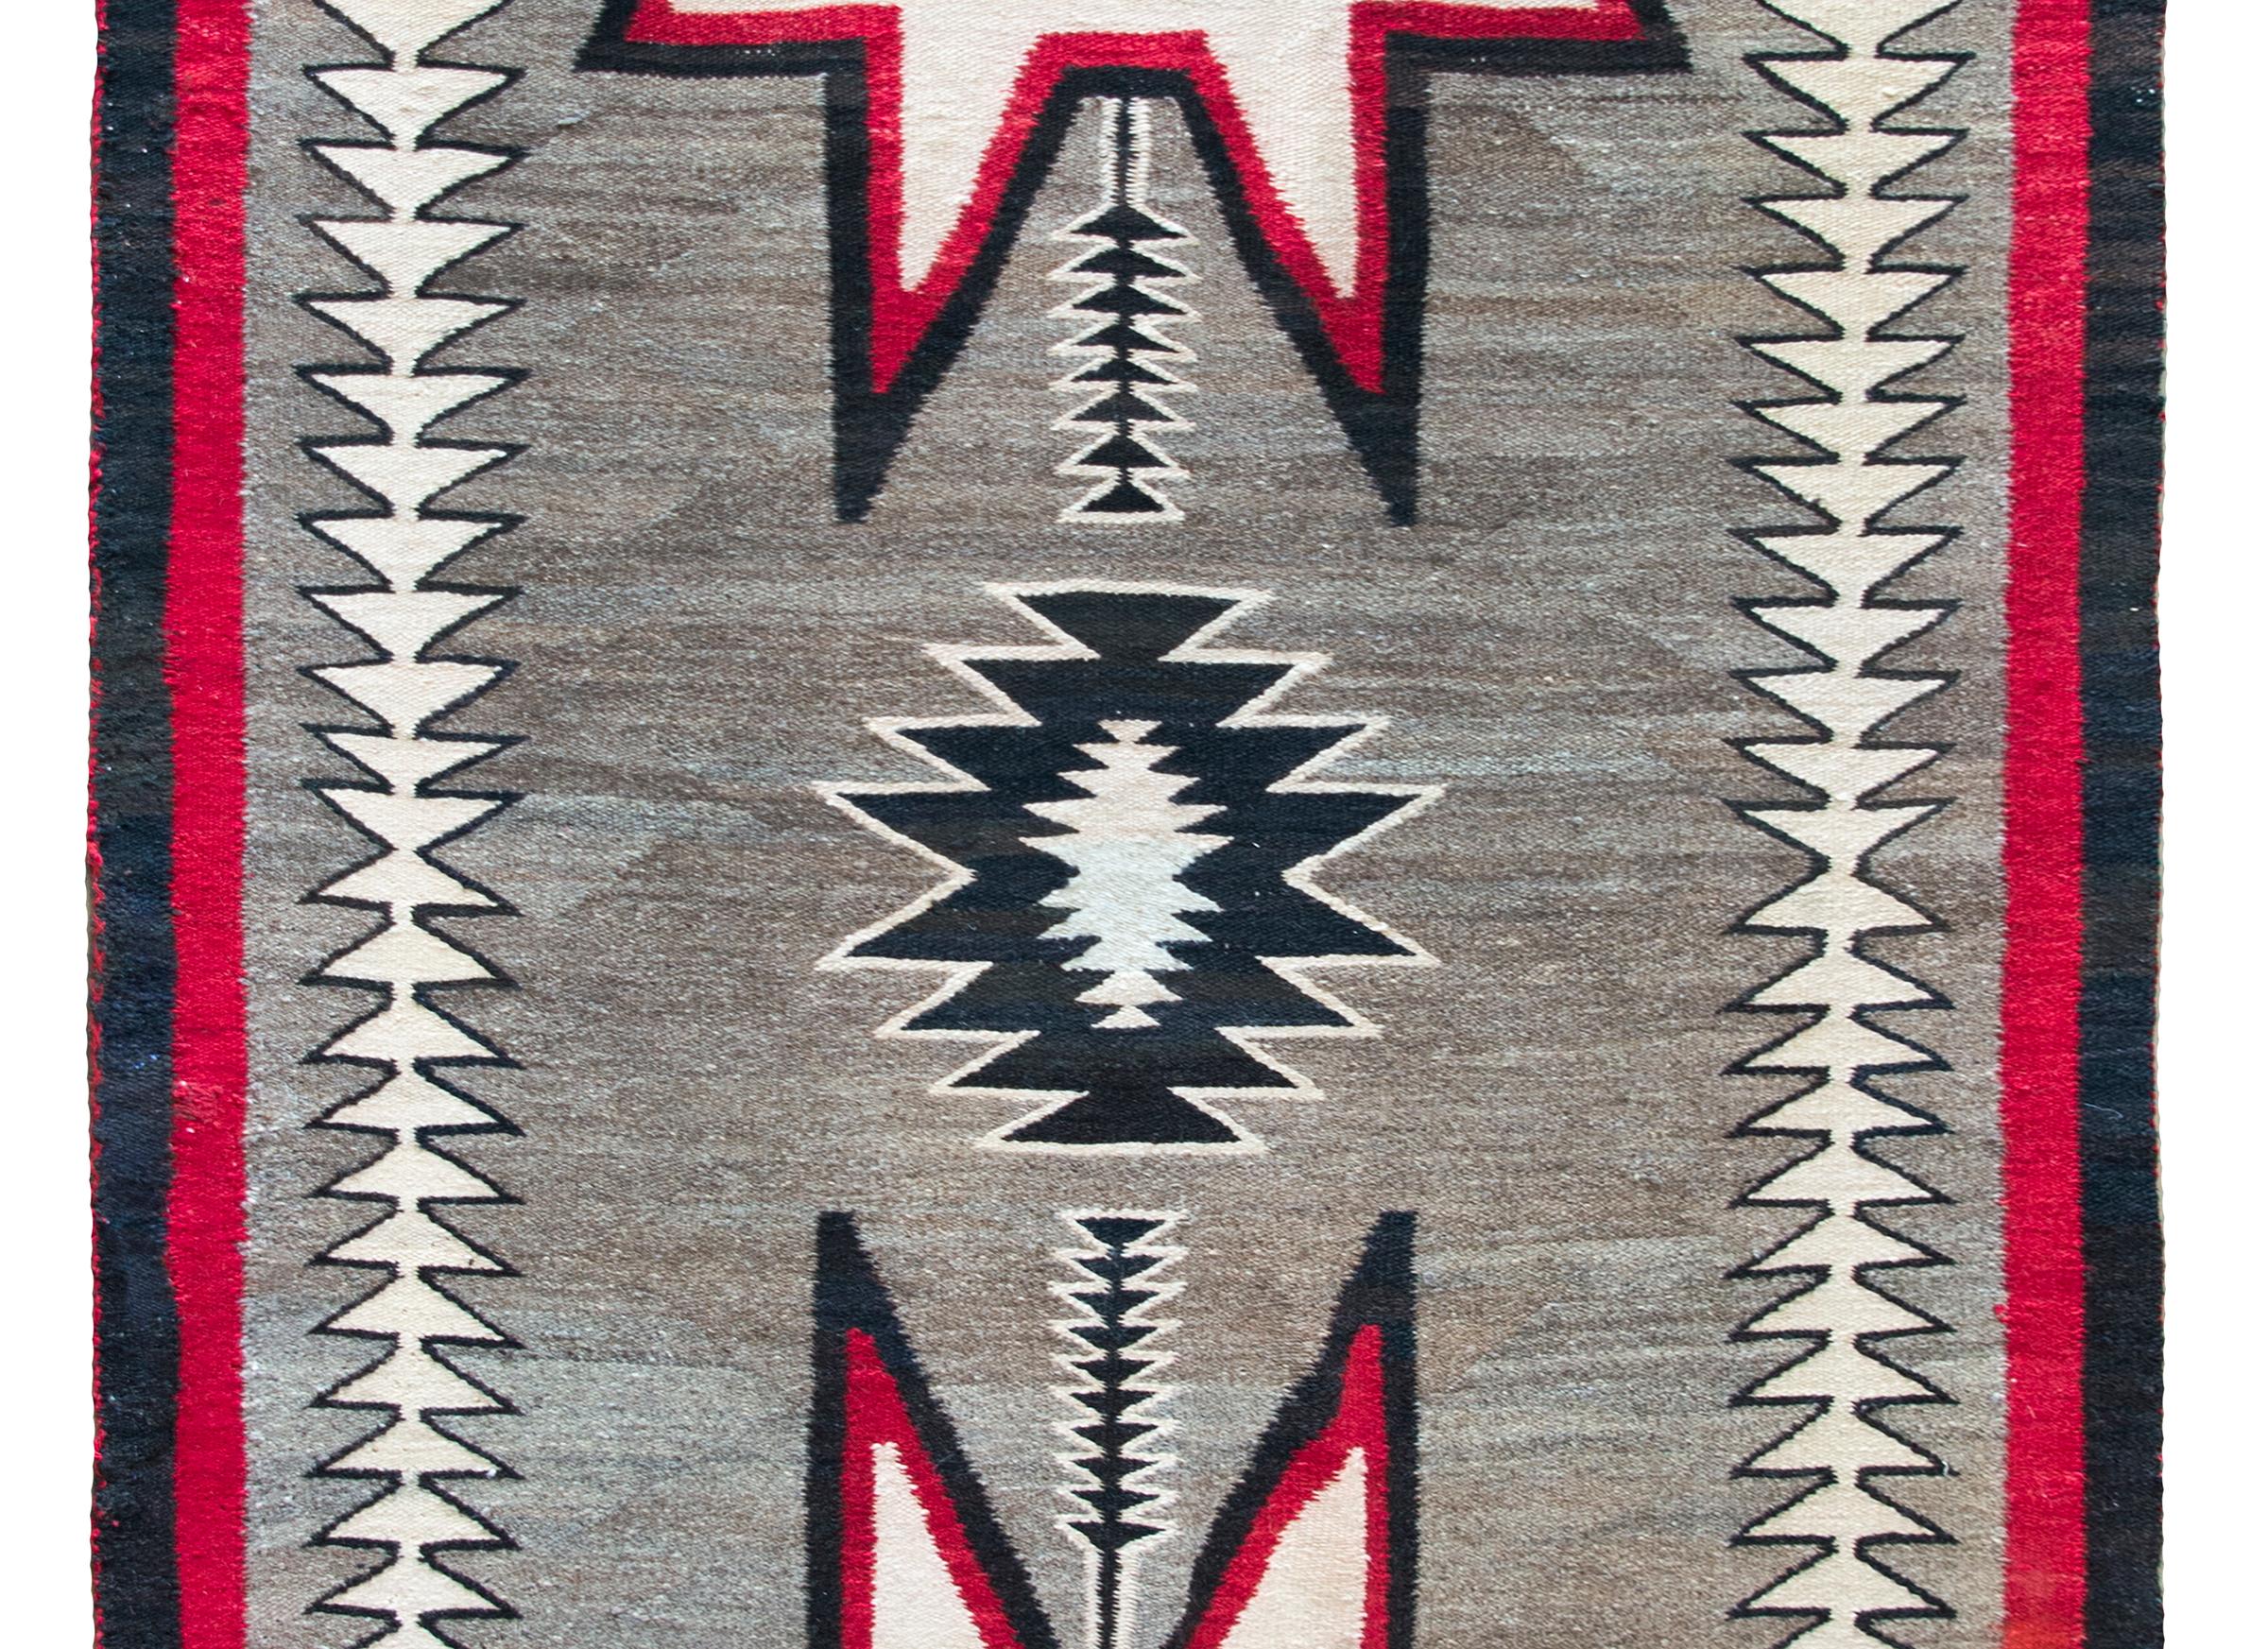 A stunning early 20th century Native American Navajo flatweave rug with two incredible large star-shaped medallions flanking a central smaller black medallion set against a natural abrash gray wool ground, and surrounded by a simple border with